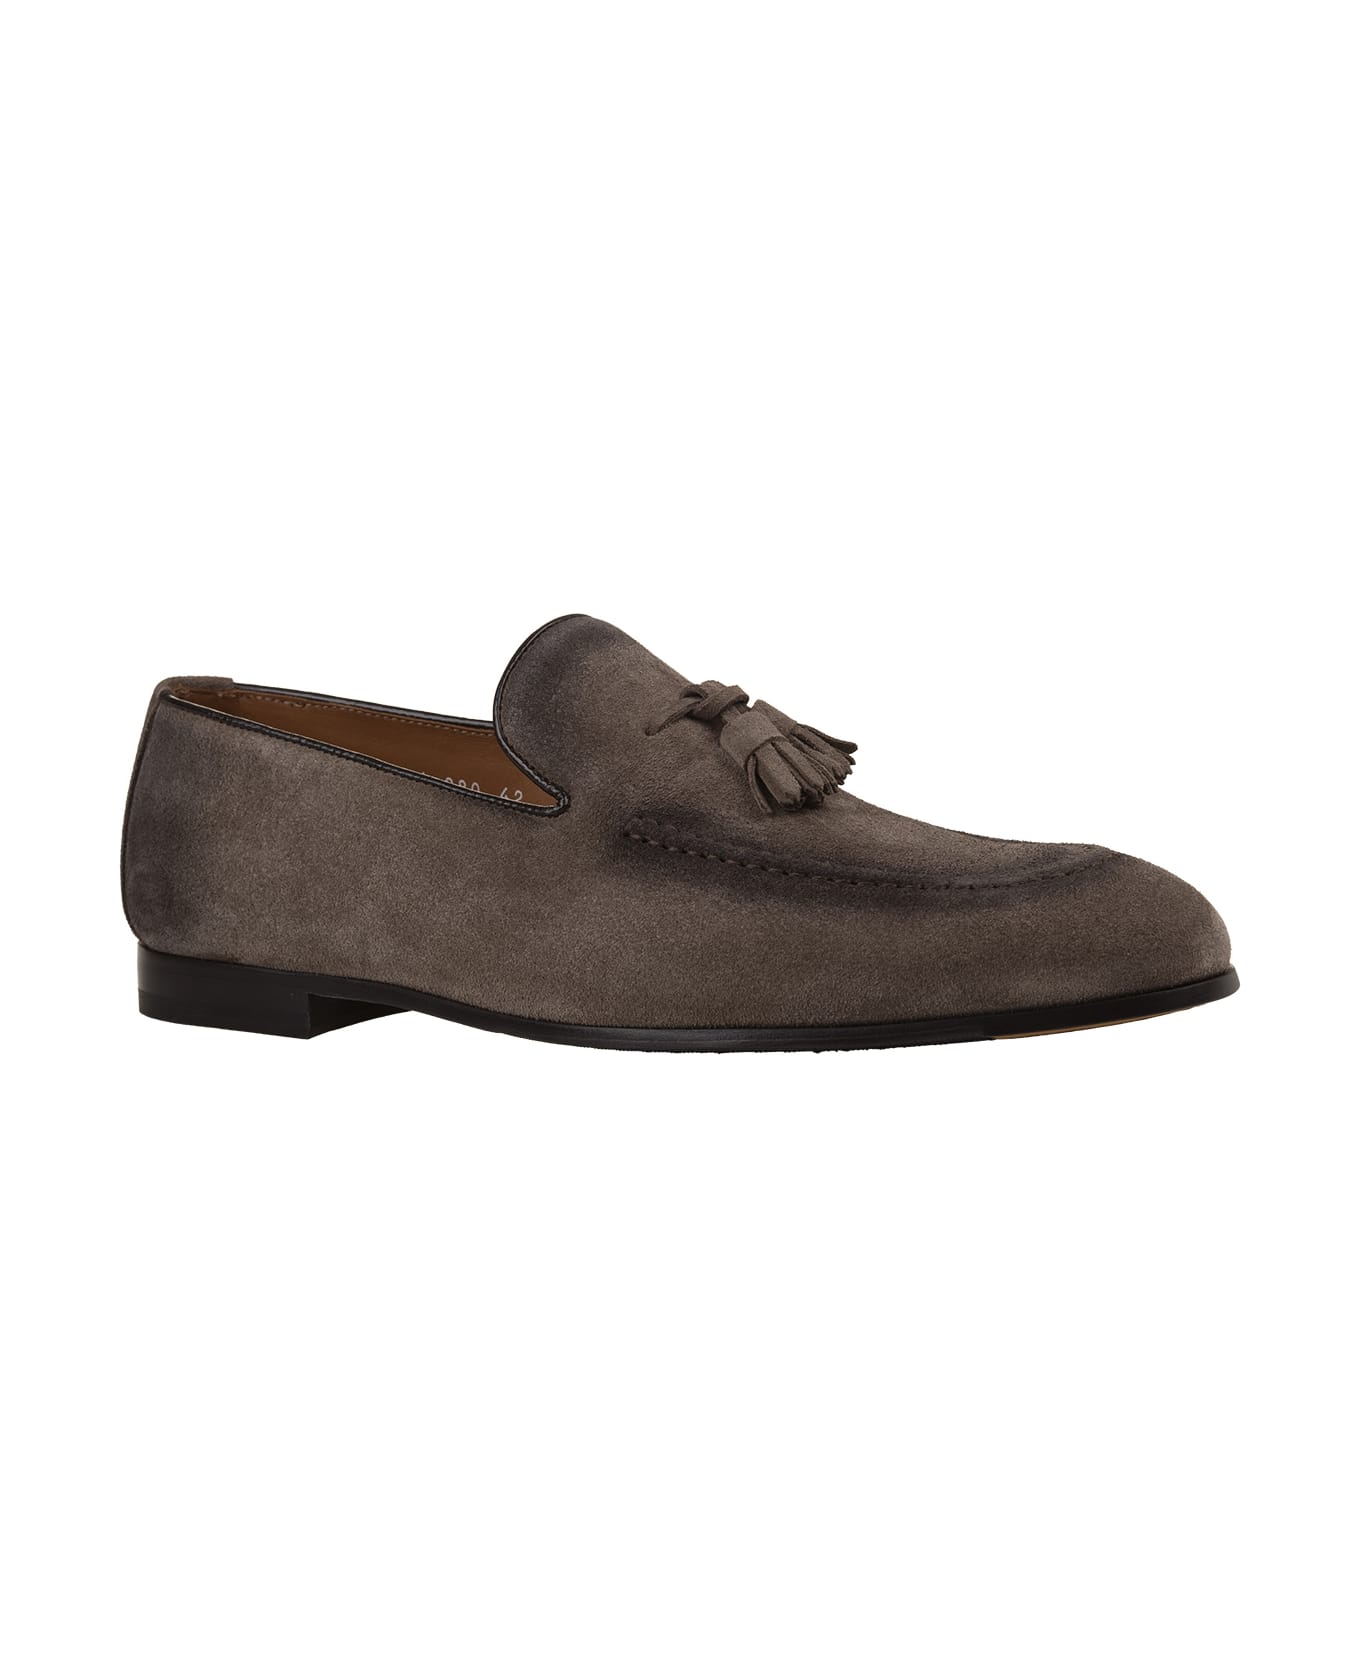 Doucal's Brown Suede Loafers With Tassels - Brown